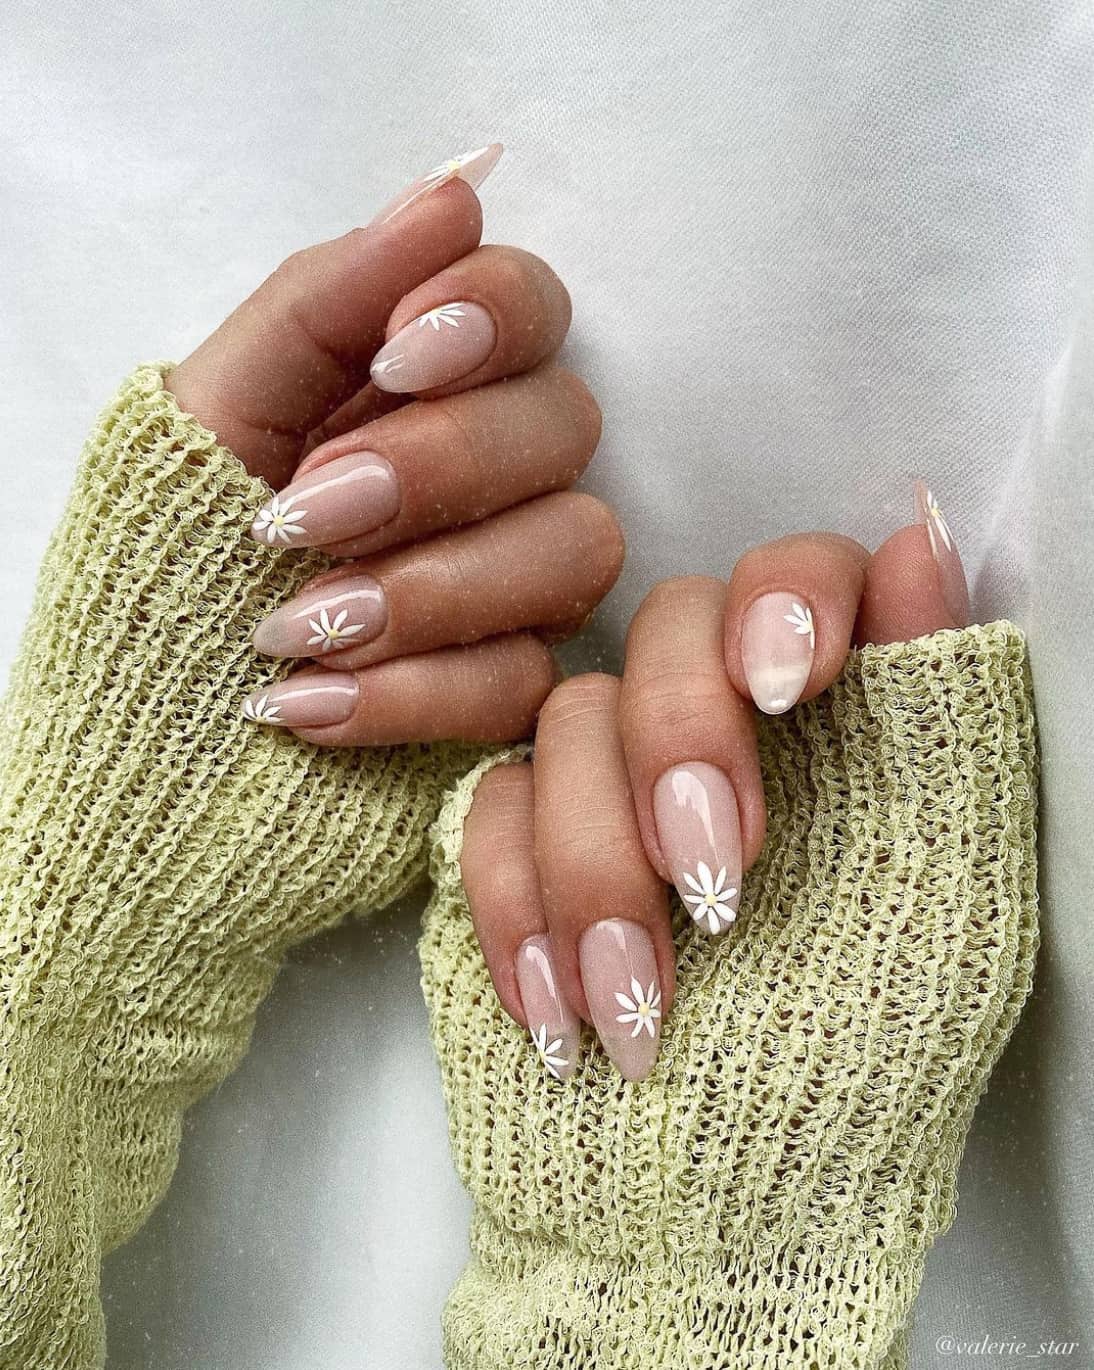 A hand with medium almond nails painted a nude tone and accented with white flowers